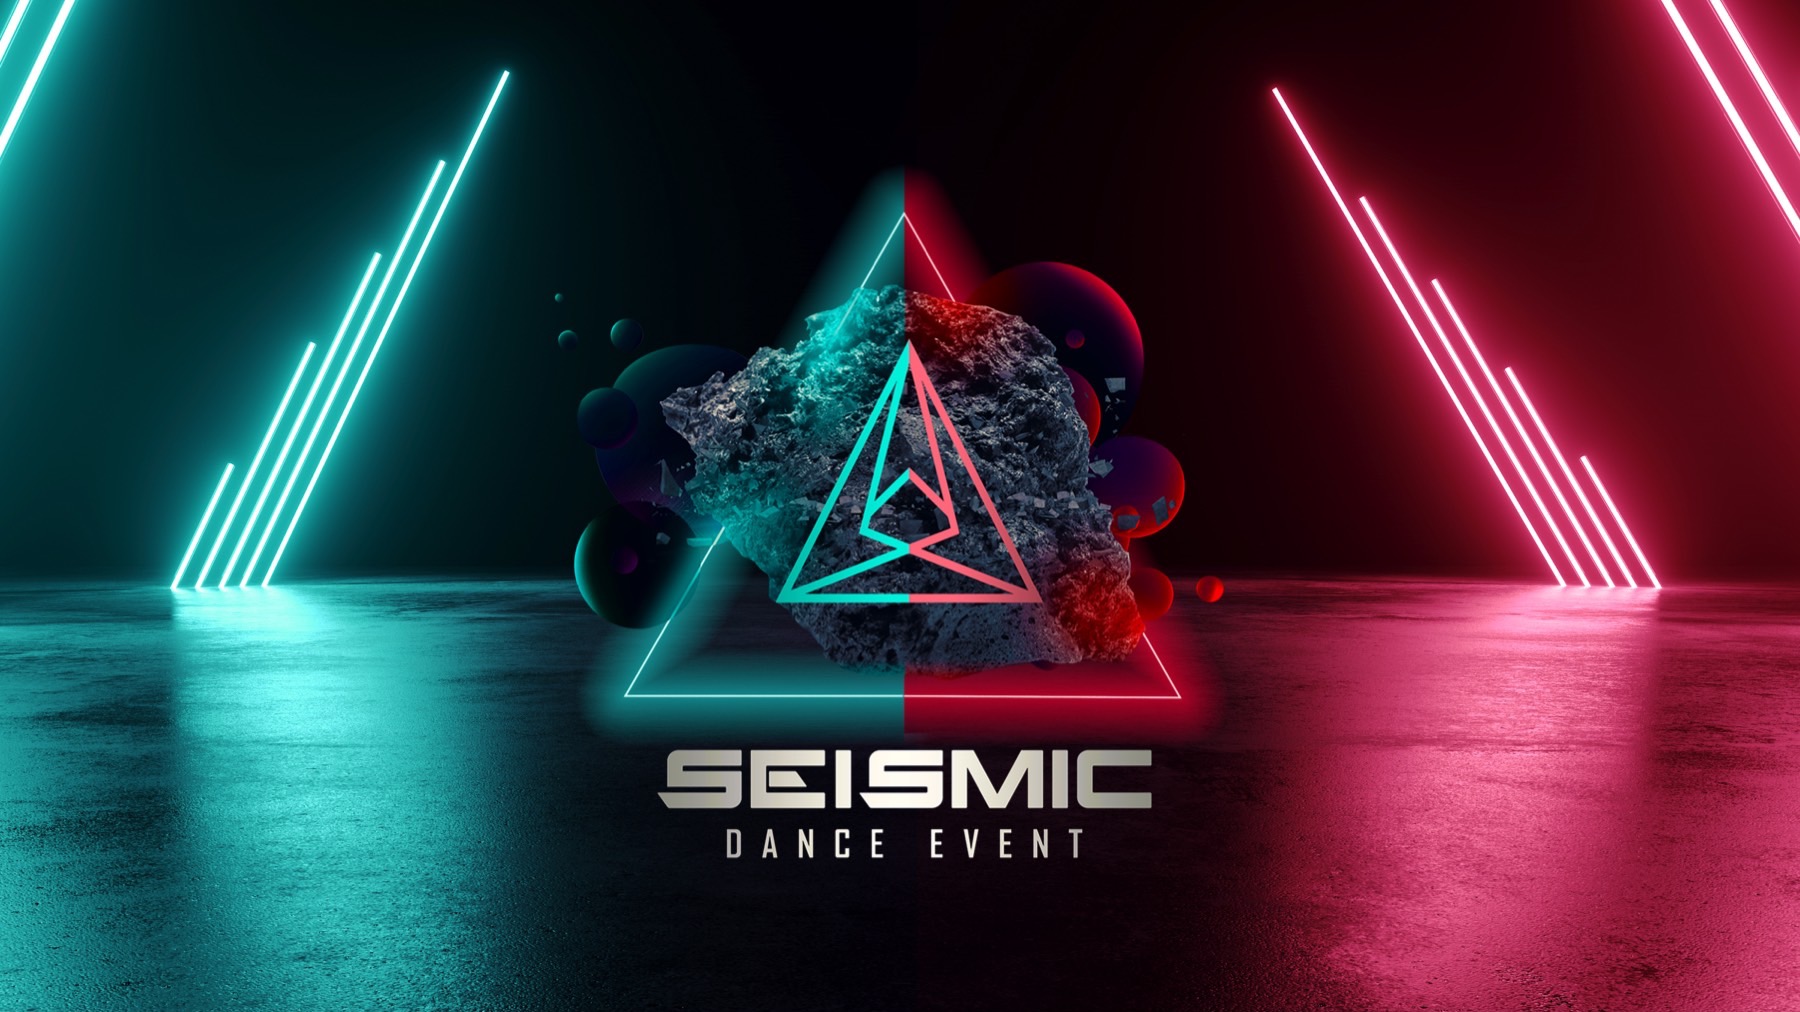 Seismic Dance Event Unveils Phase One Lineup Featuring, Amelie Lens, Black Coffee, Seth Troxler, Patrick Topping, and Many More